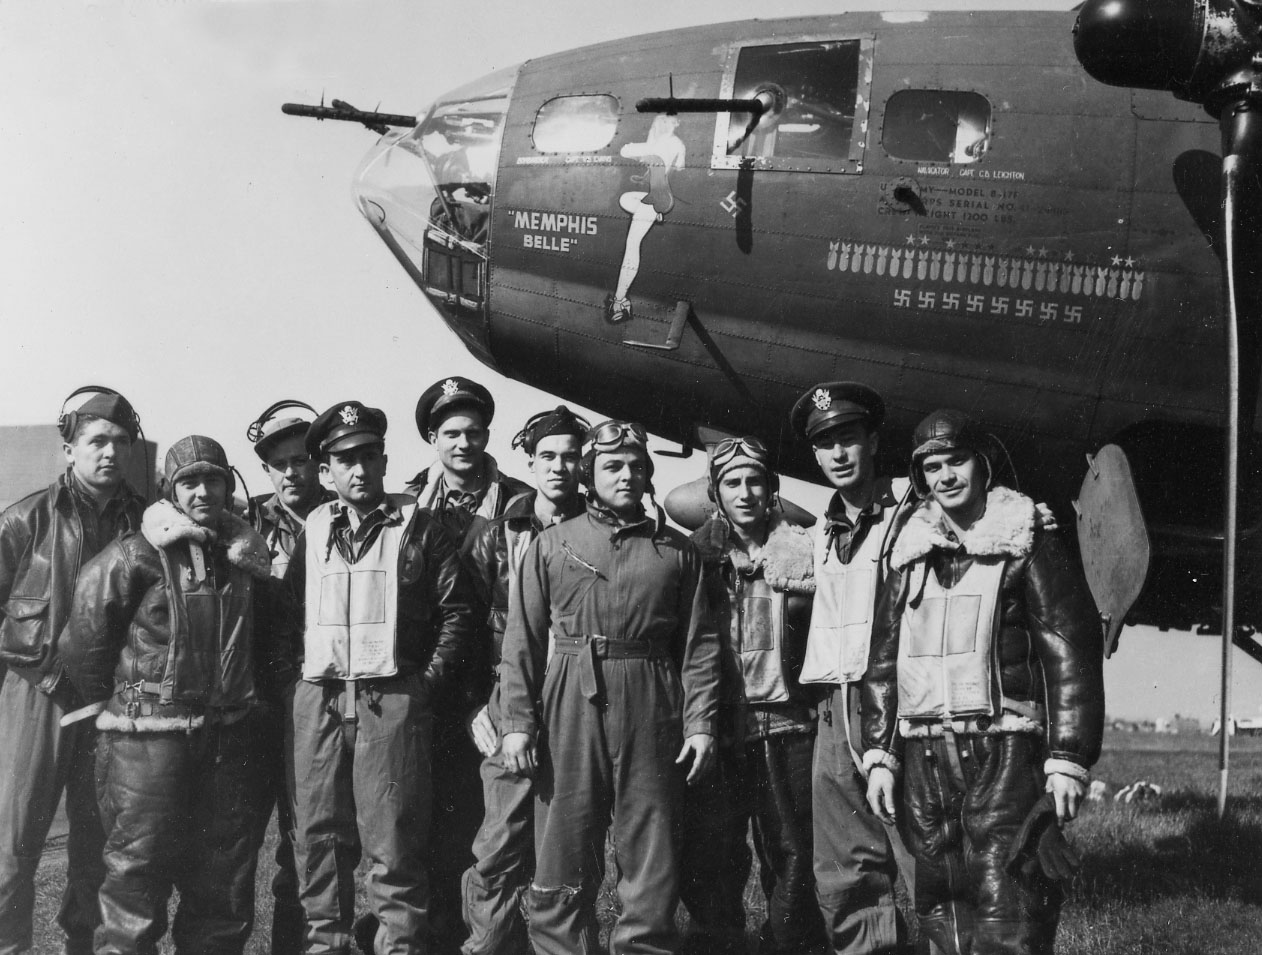 The crew of the "Memphis Belle"® after their 25th mission: (l to r) TSgt. Harold Loch (top turret gunner/engineer), SSg.t Cecil Scott (ball turret gunner), TSgt. Robert Hanson (radio operator), Capt. James Verinis (copilot), Capt. Robert Morgan (pilot), Capt. Charles Leighton (navigator), SSgt. John Quinlan (tail gunner), SSgt. Casimer Nastal (waist gunner), Capt. Vincent Evans (bombardier), and SSgt. Clarence Winchell (waist gunner). (U.S. Air Force photo) Gen. Hap Arnold, commander of the U.S. Army Air Forces, examining the "Mempis Belle" after it returned to the United States. (U.S. Air Force photo) 